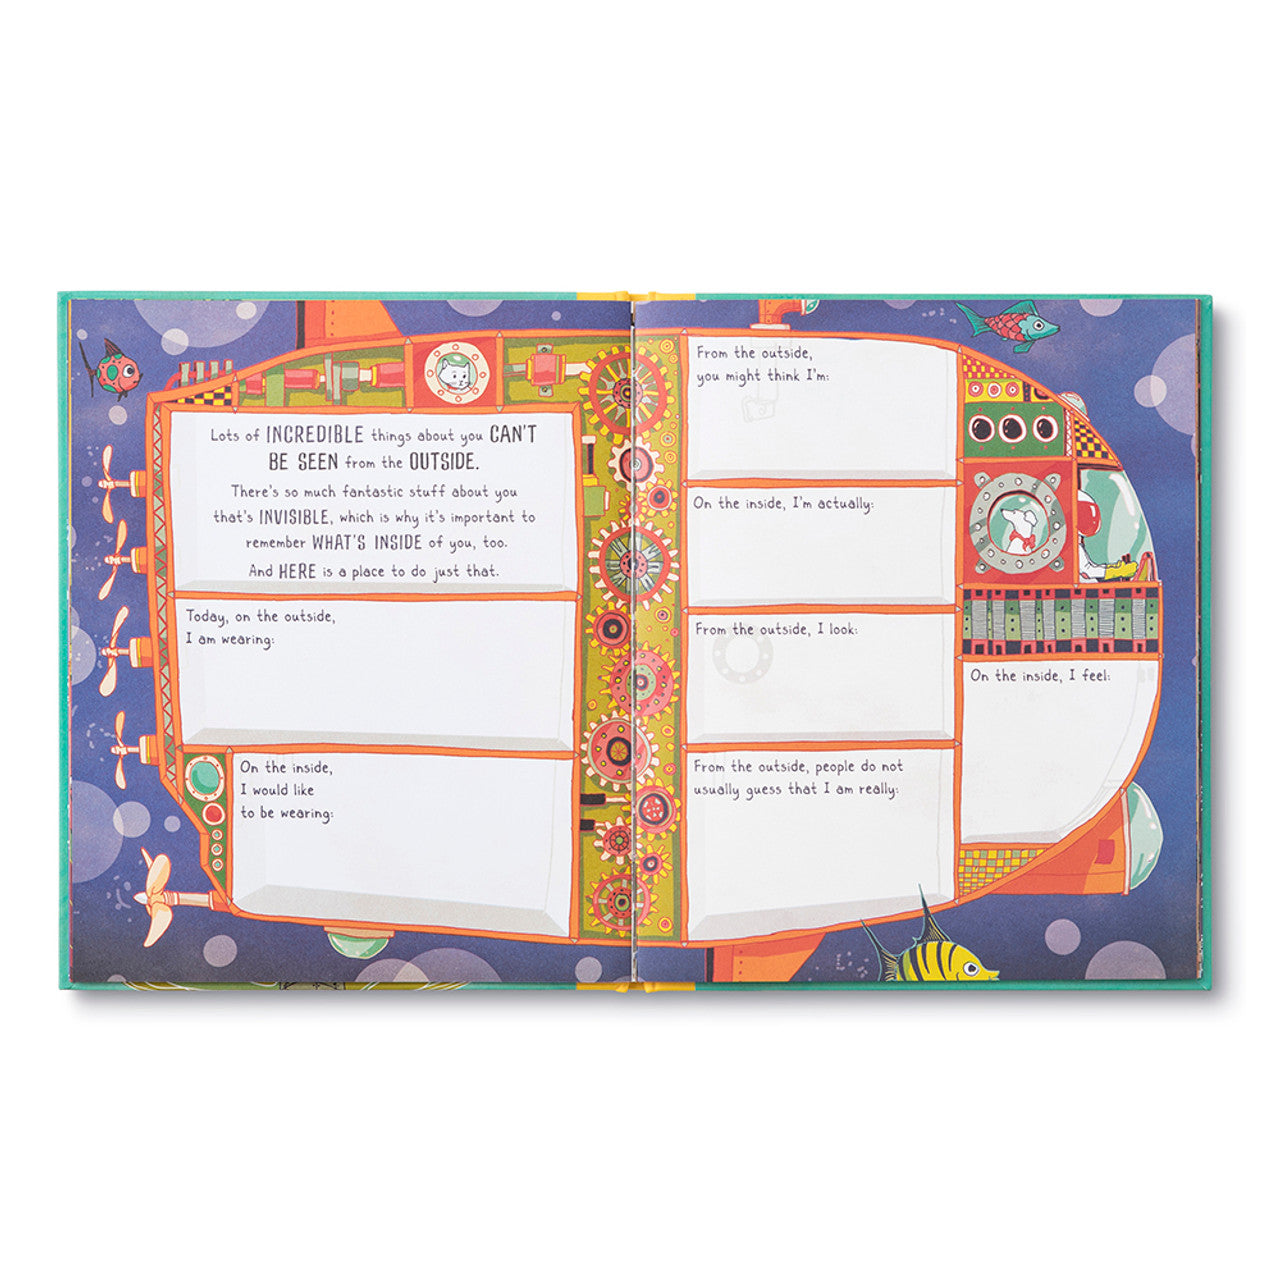 Superpowers Activity Book